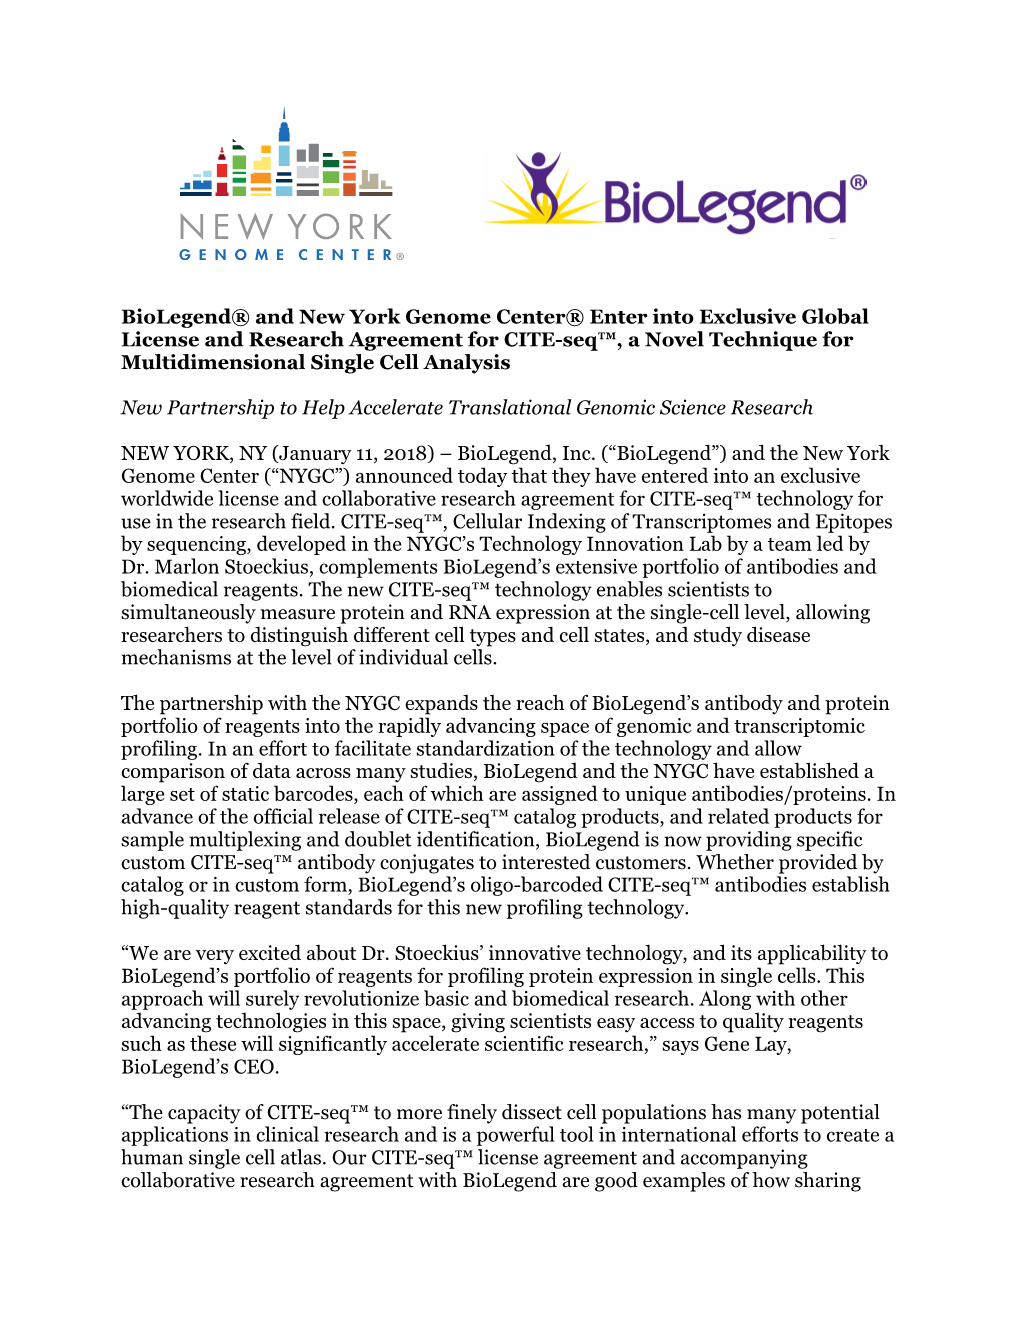 Biolegend® and New York Genome Center® Enter Into Exclusive Global